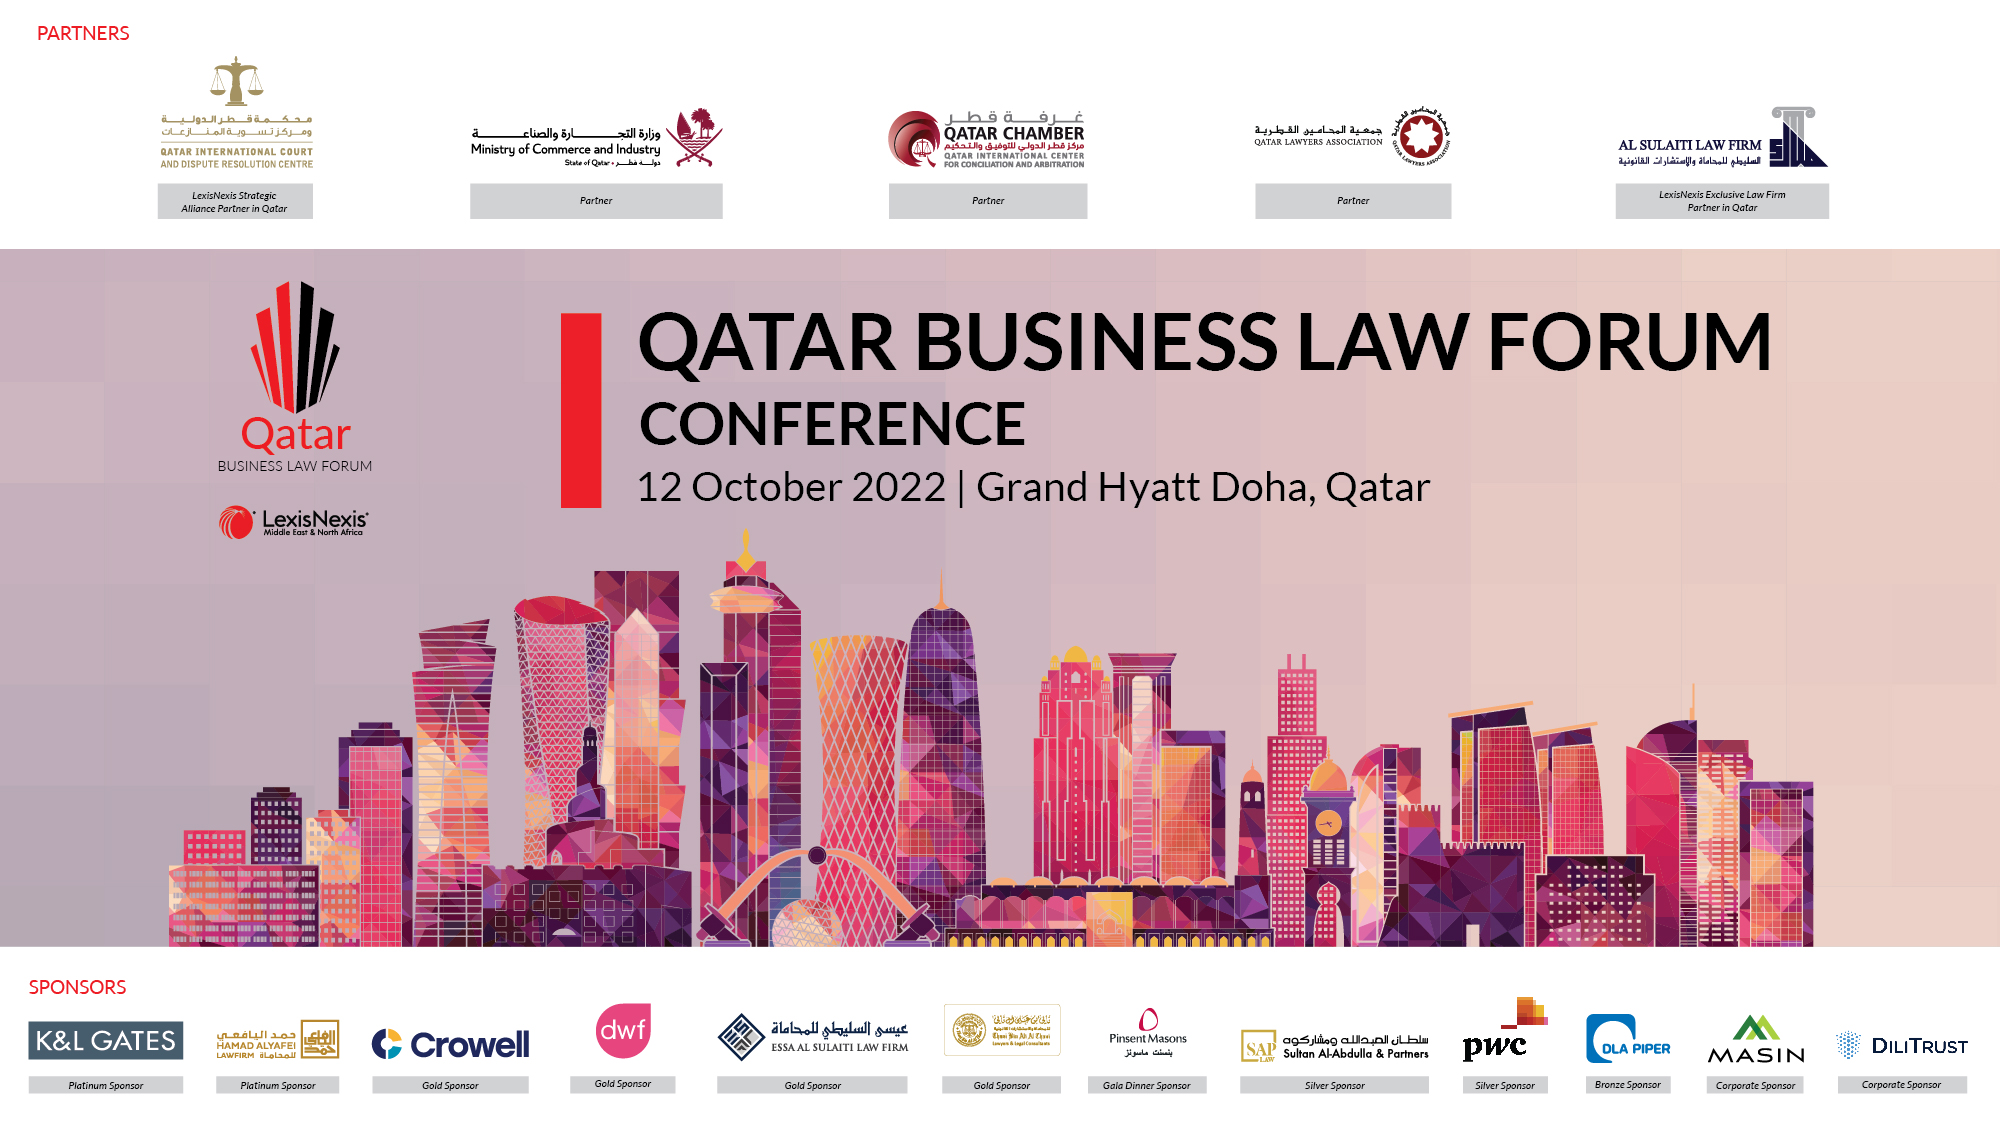 LexisNexis Hosts the 7th Qatar Business Law Forum Conference in Doha, Qatar!